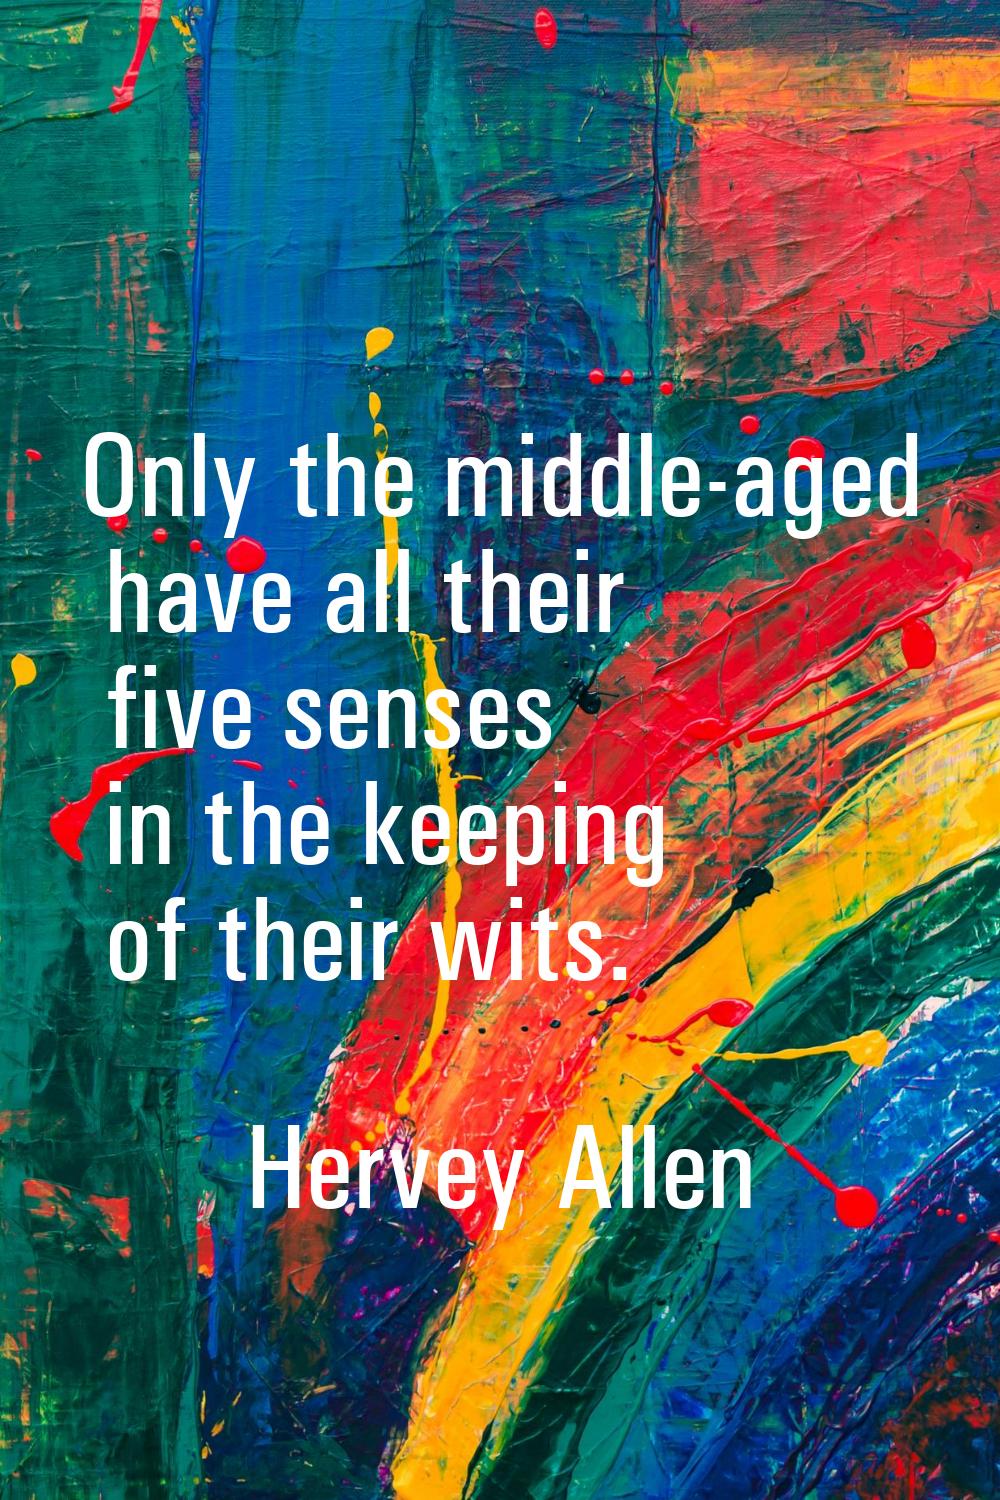 Only the middle-aged have all their five senses in the keeping of their wits.